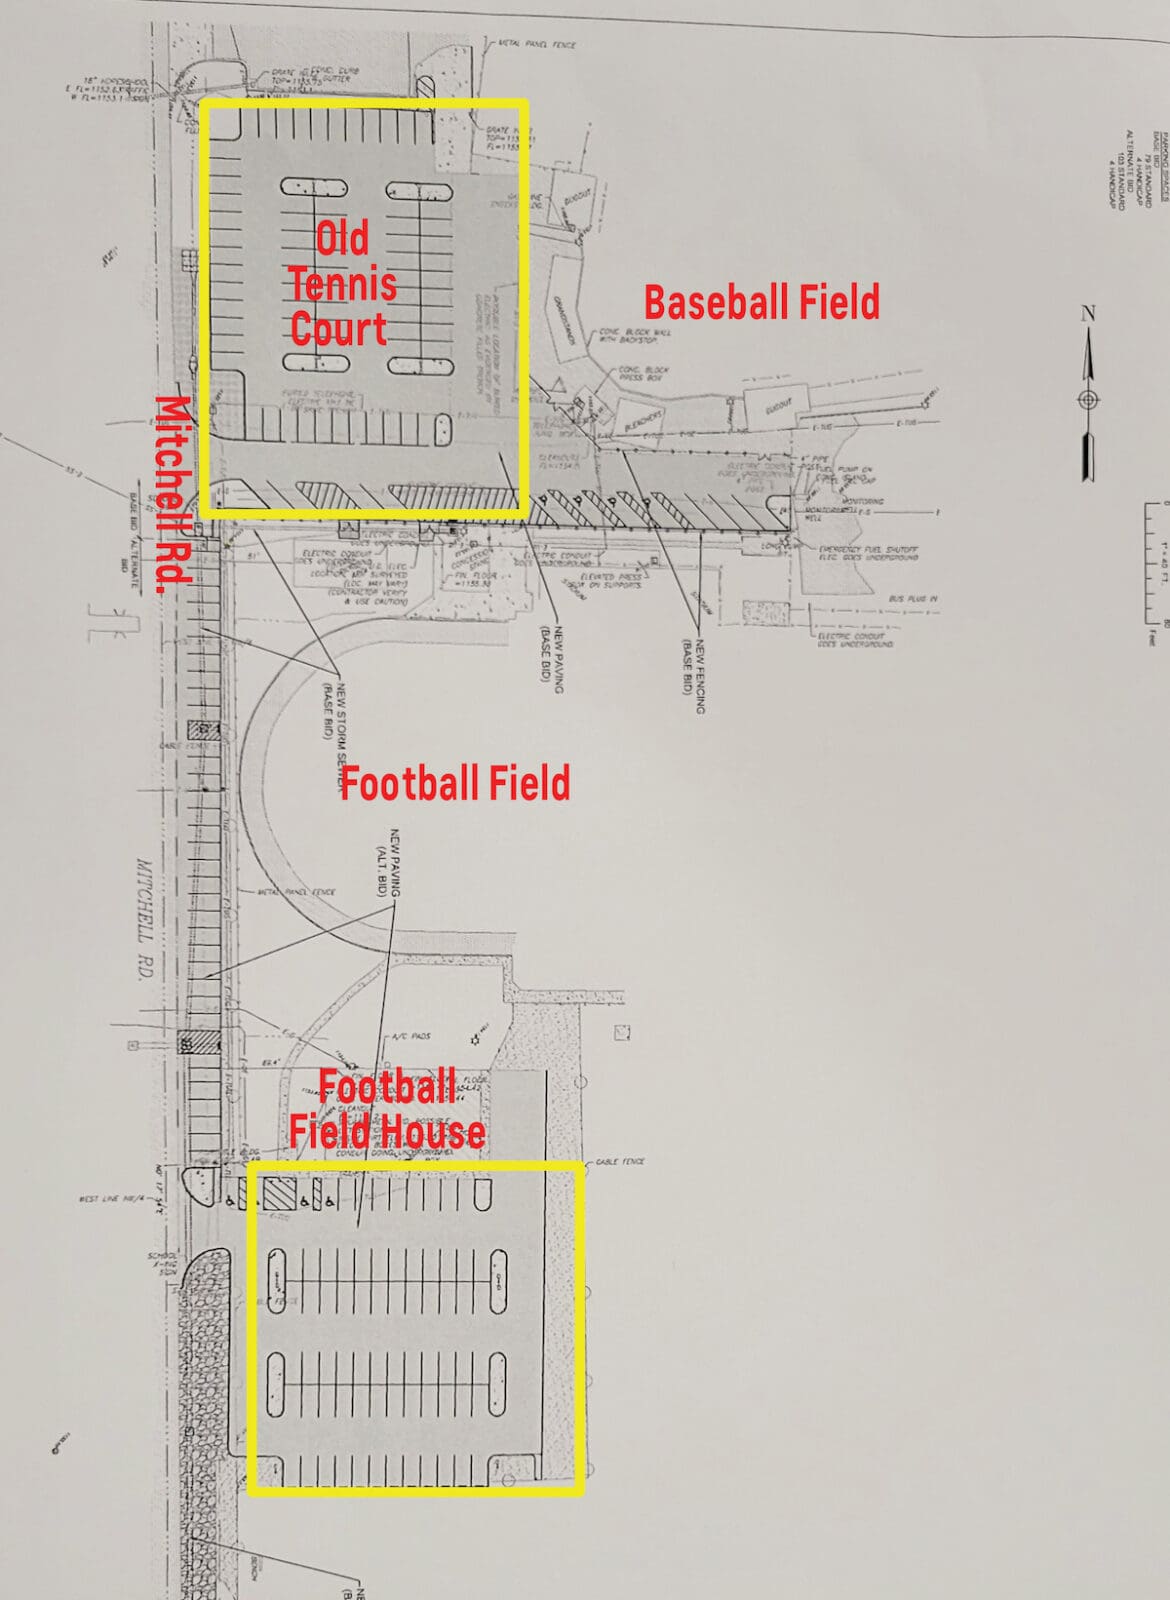 PARKING AT ATHLETIC FIELDS